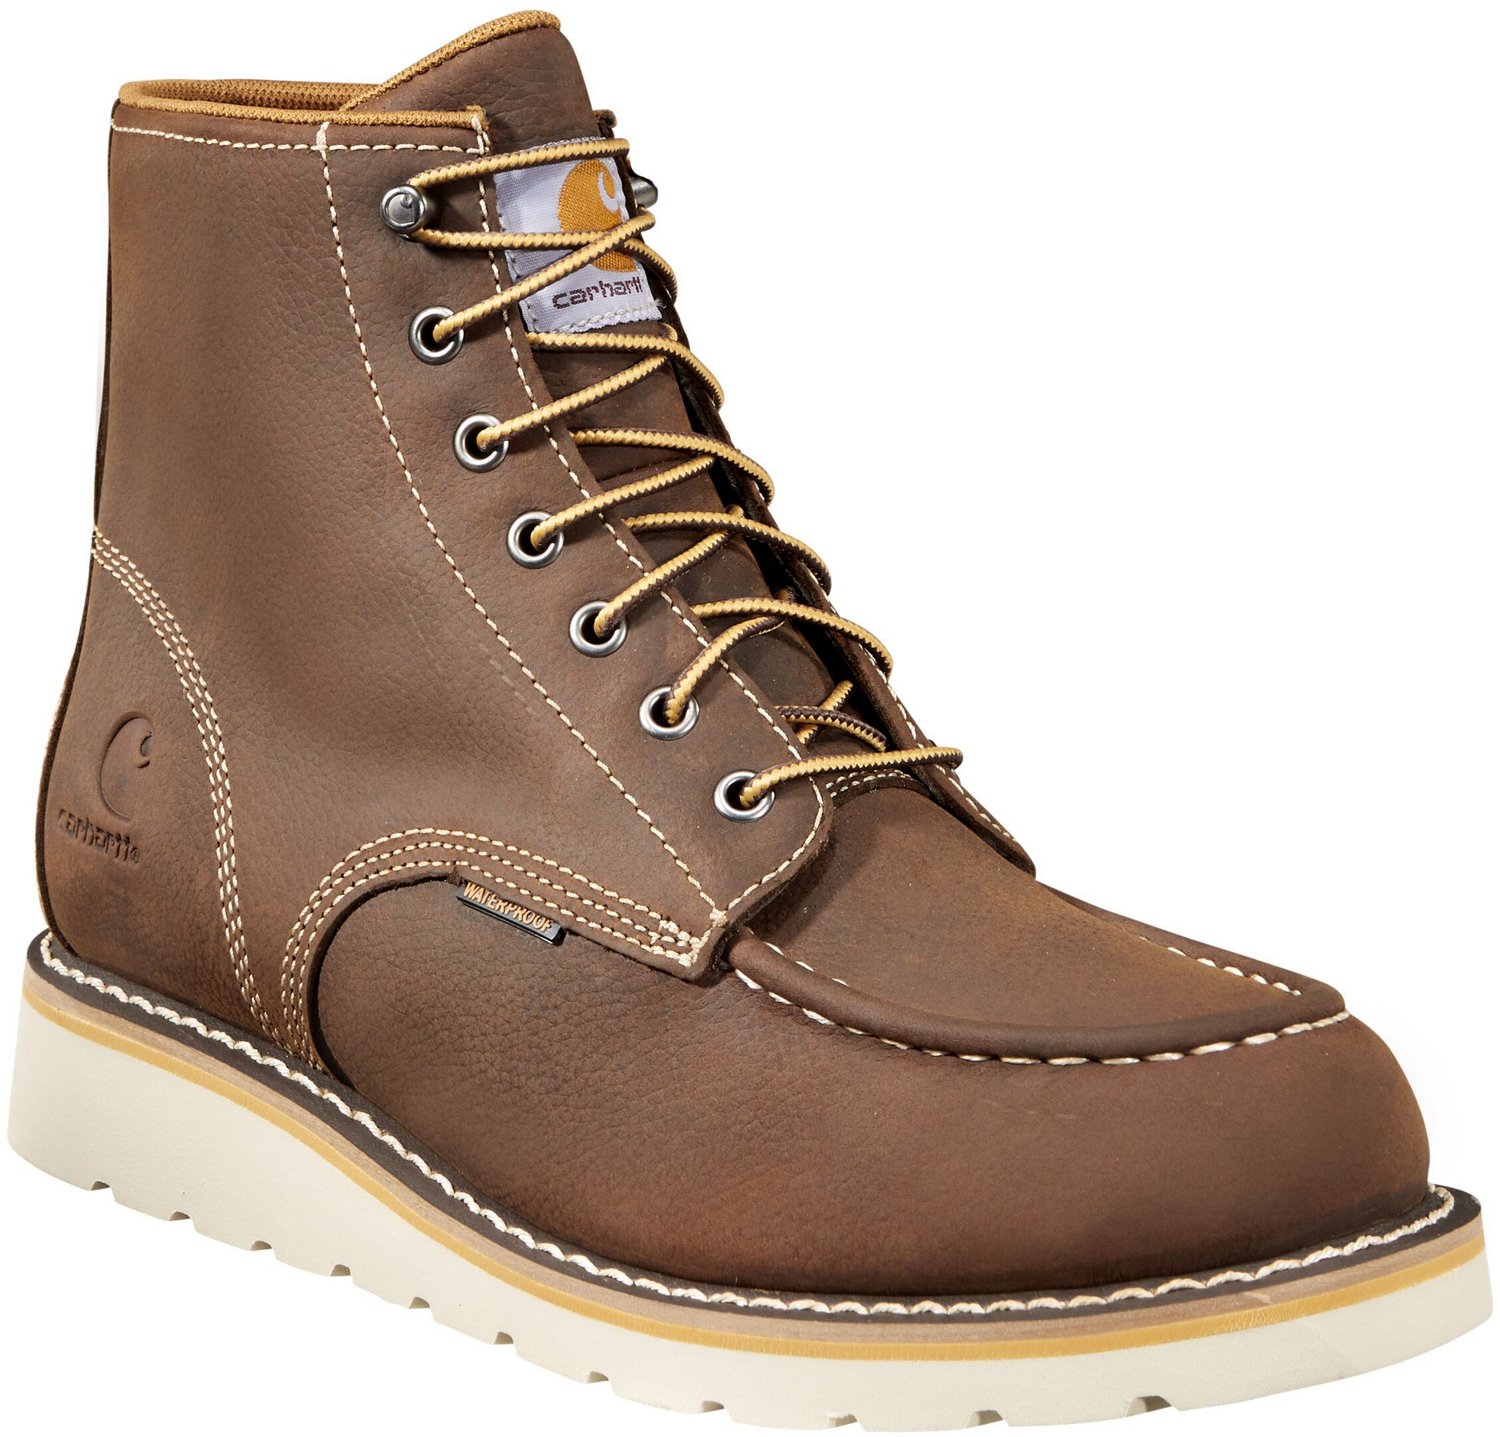 Carhartt Men's Steel Toe Wedge Boots | Free Shipping at Academy